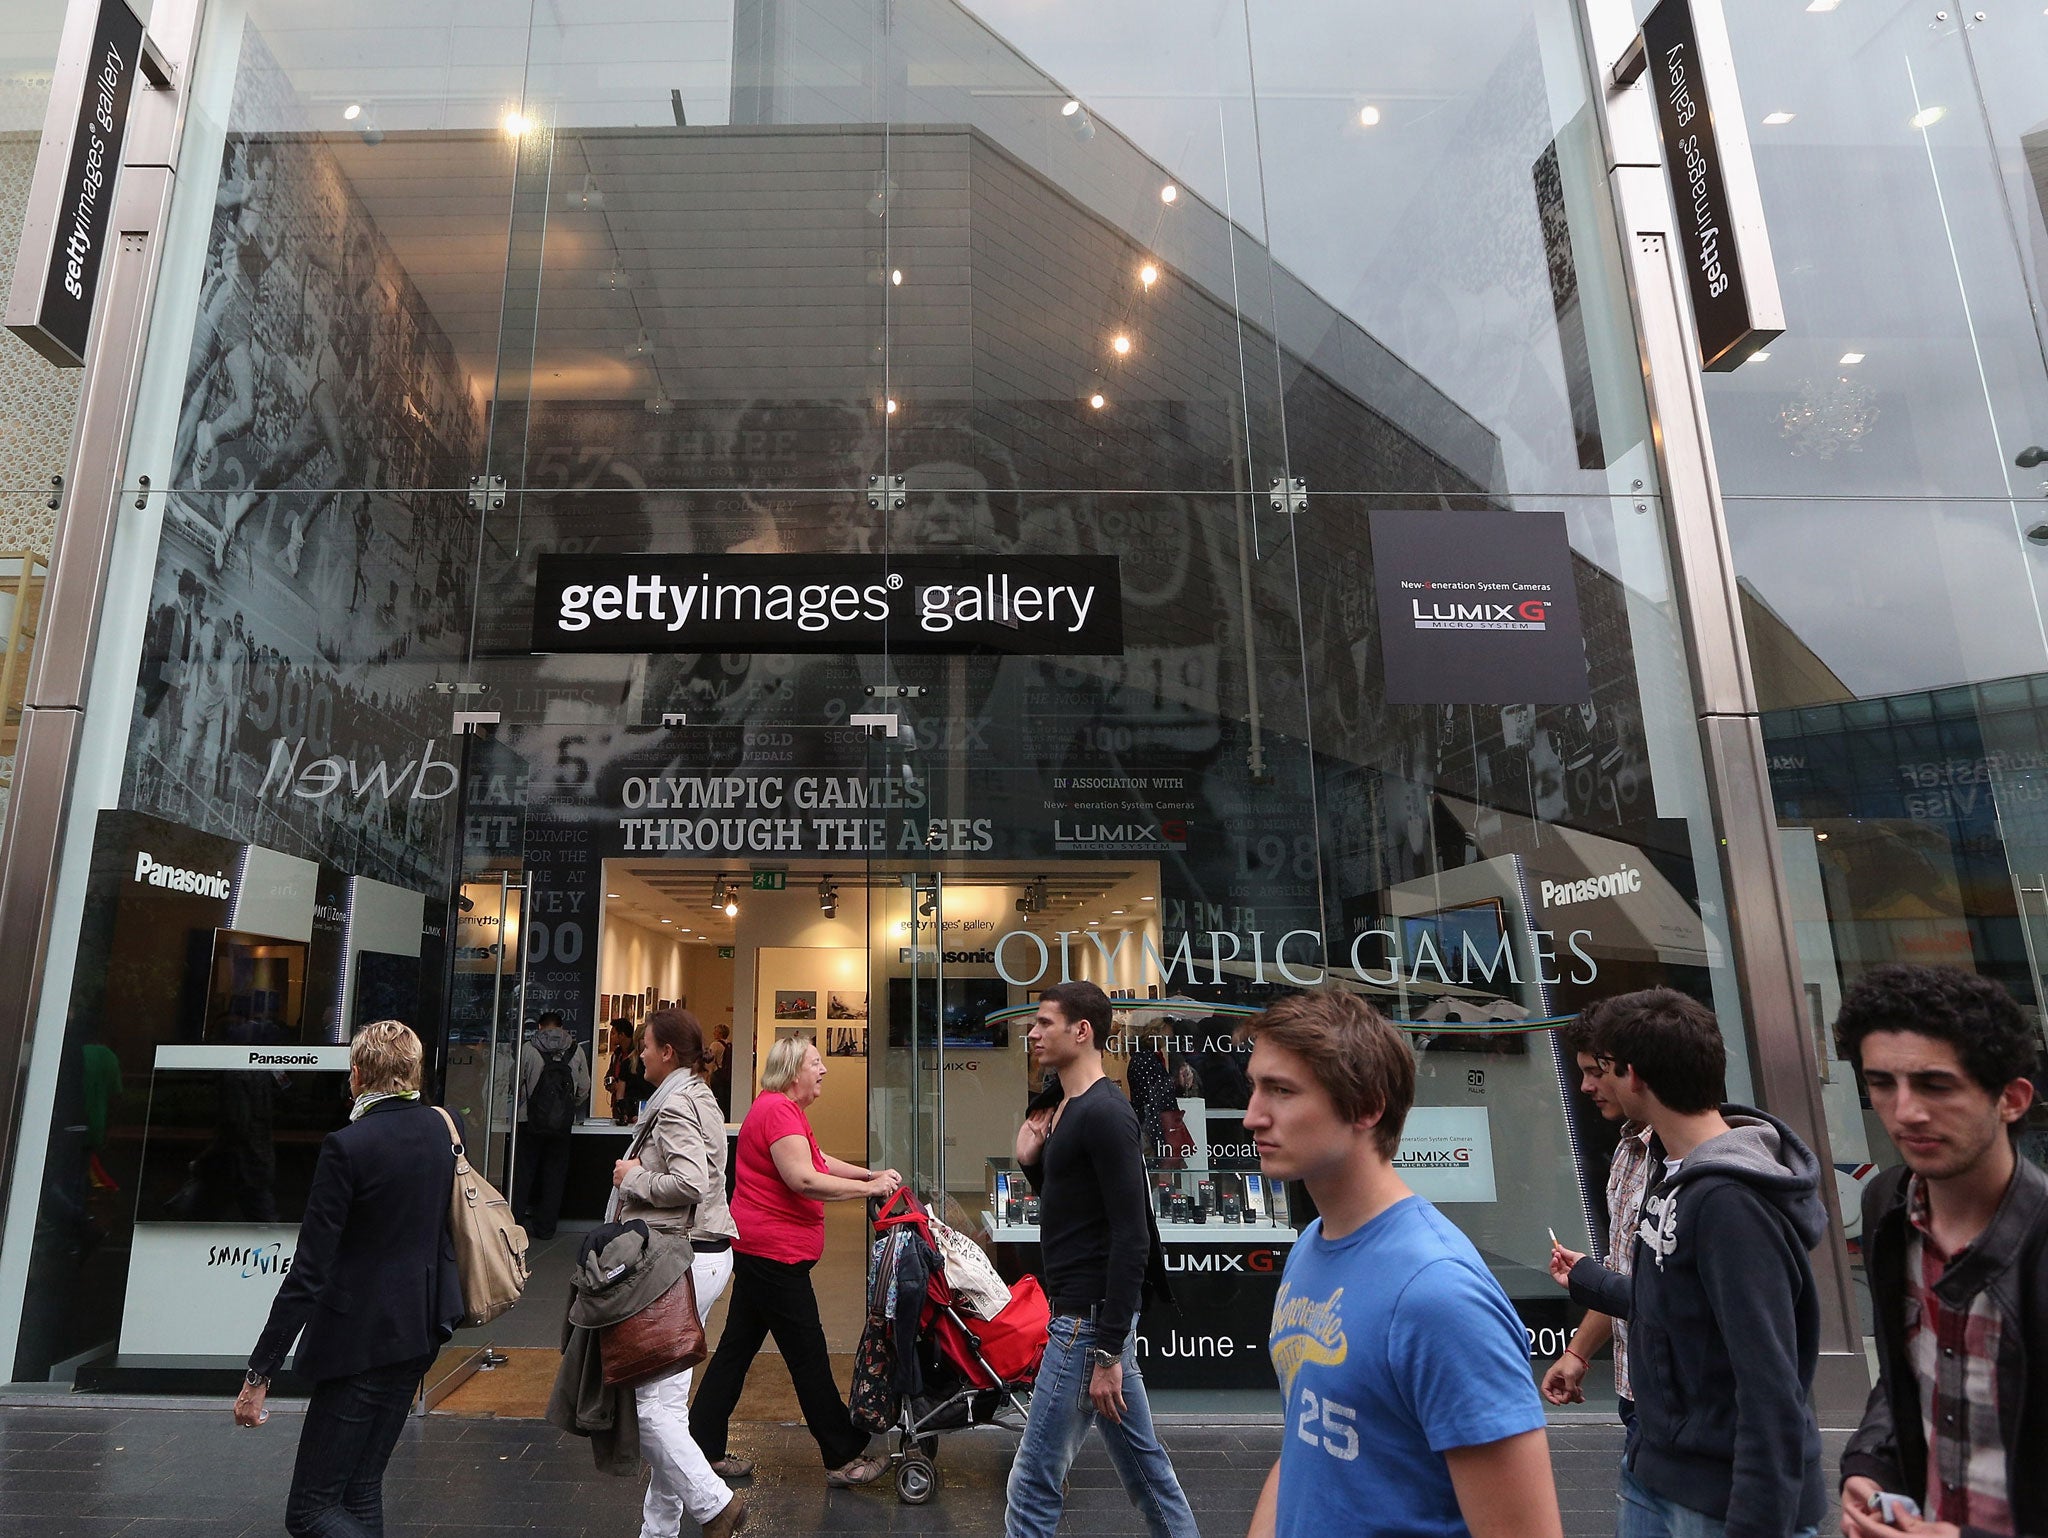 Shoppers walk past the Getty Images gallery in London